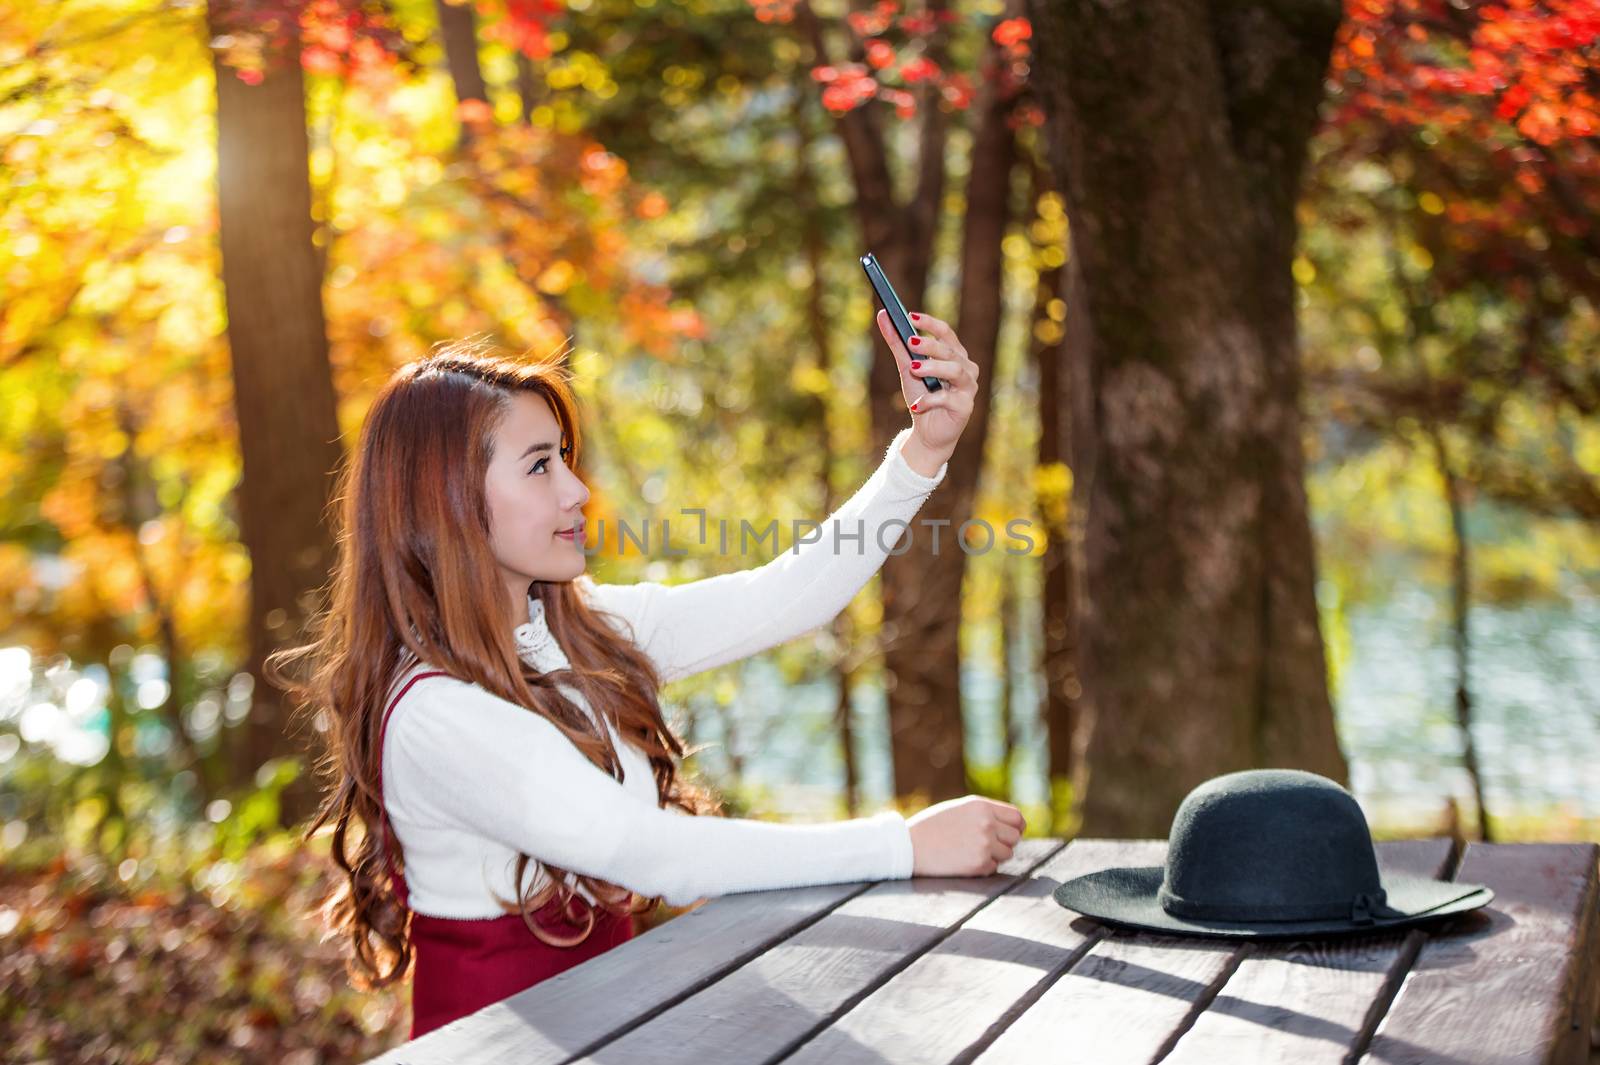 Beautiful woman in fall forest park taking selfie self photo with smartphone.